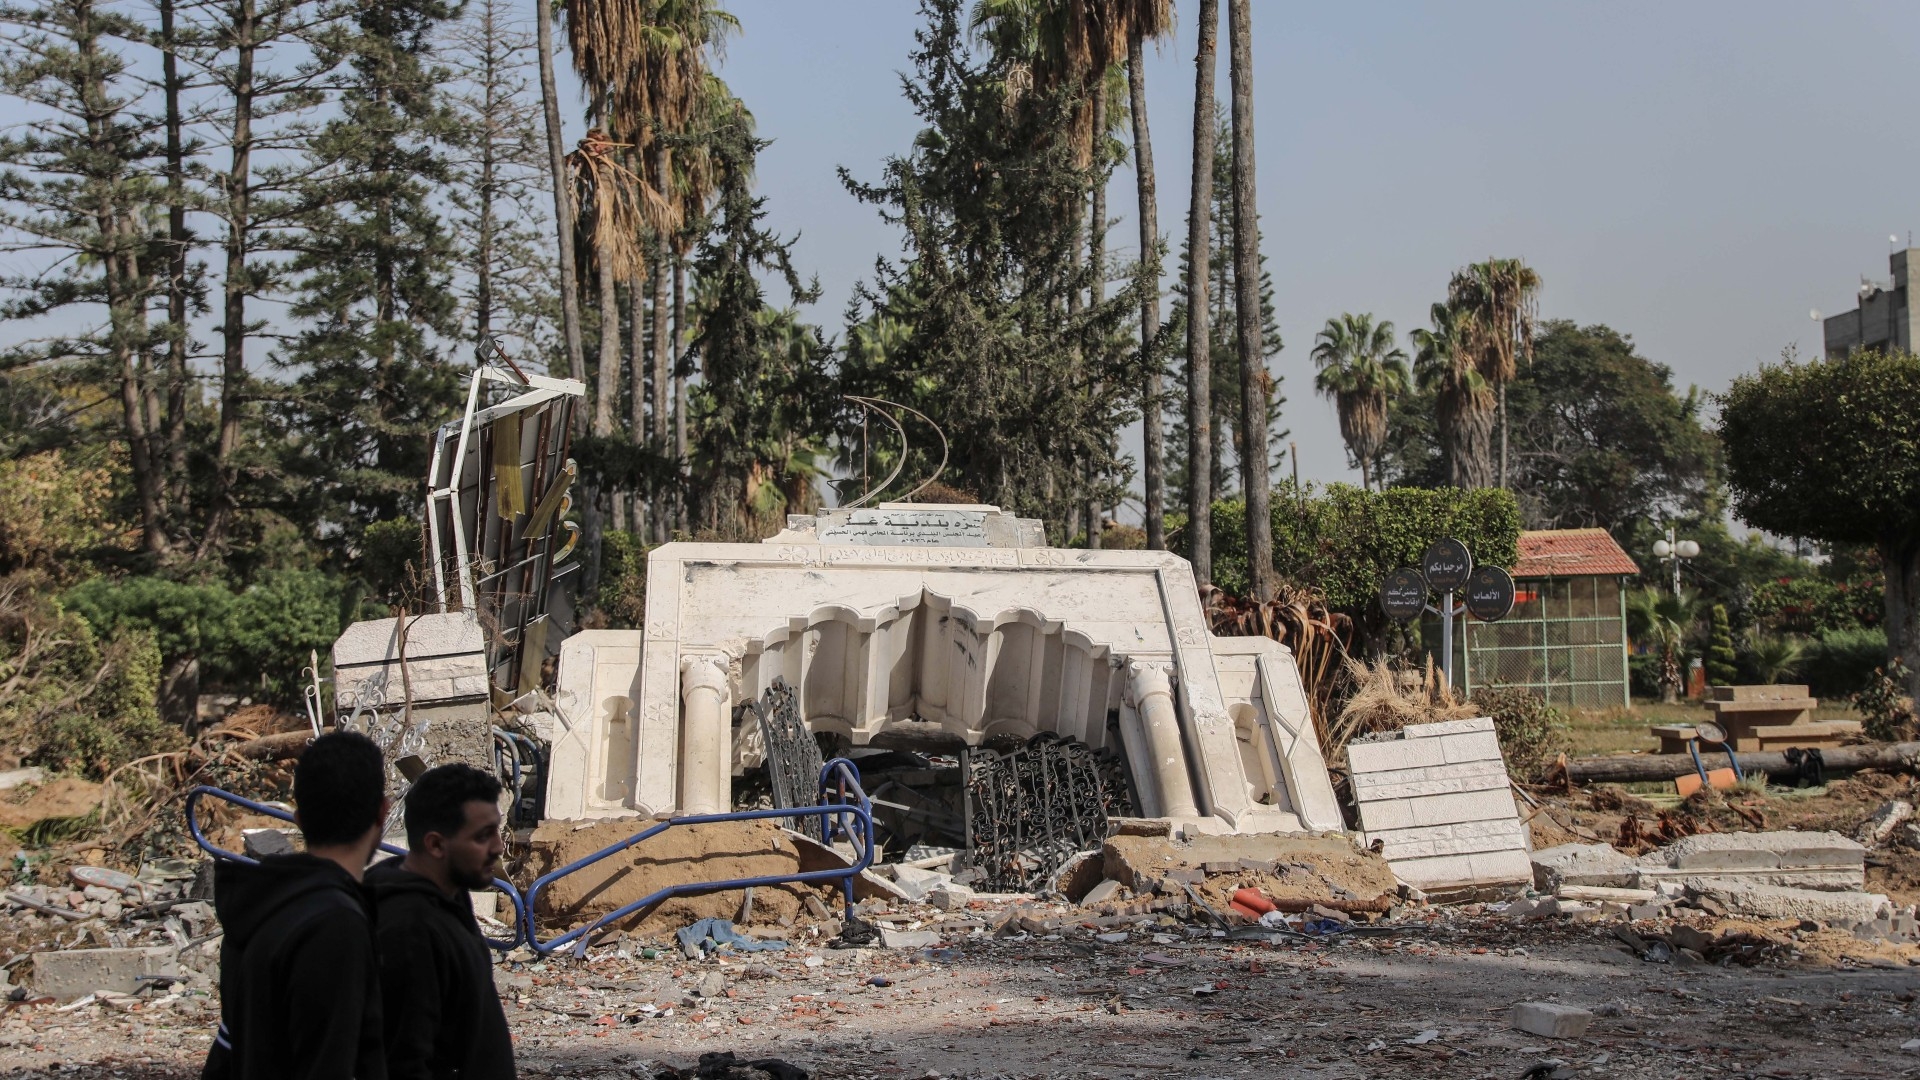 A park in Gaza City destroyed after Israeli air strikes, as pictured on 24 November 20233 (MEE)